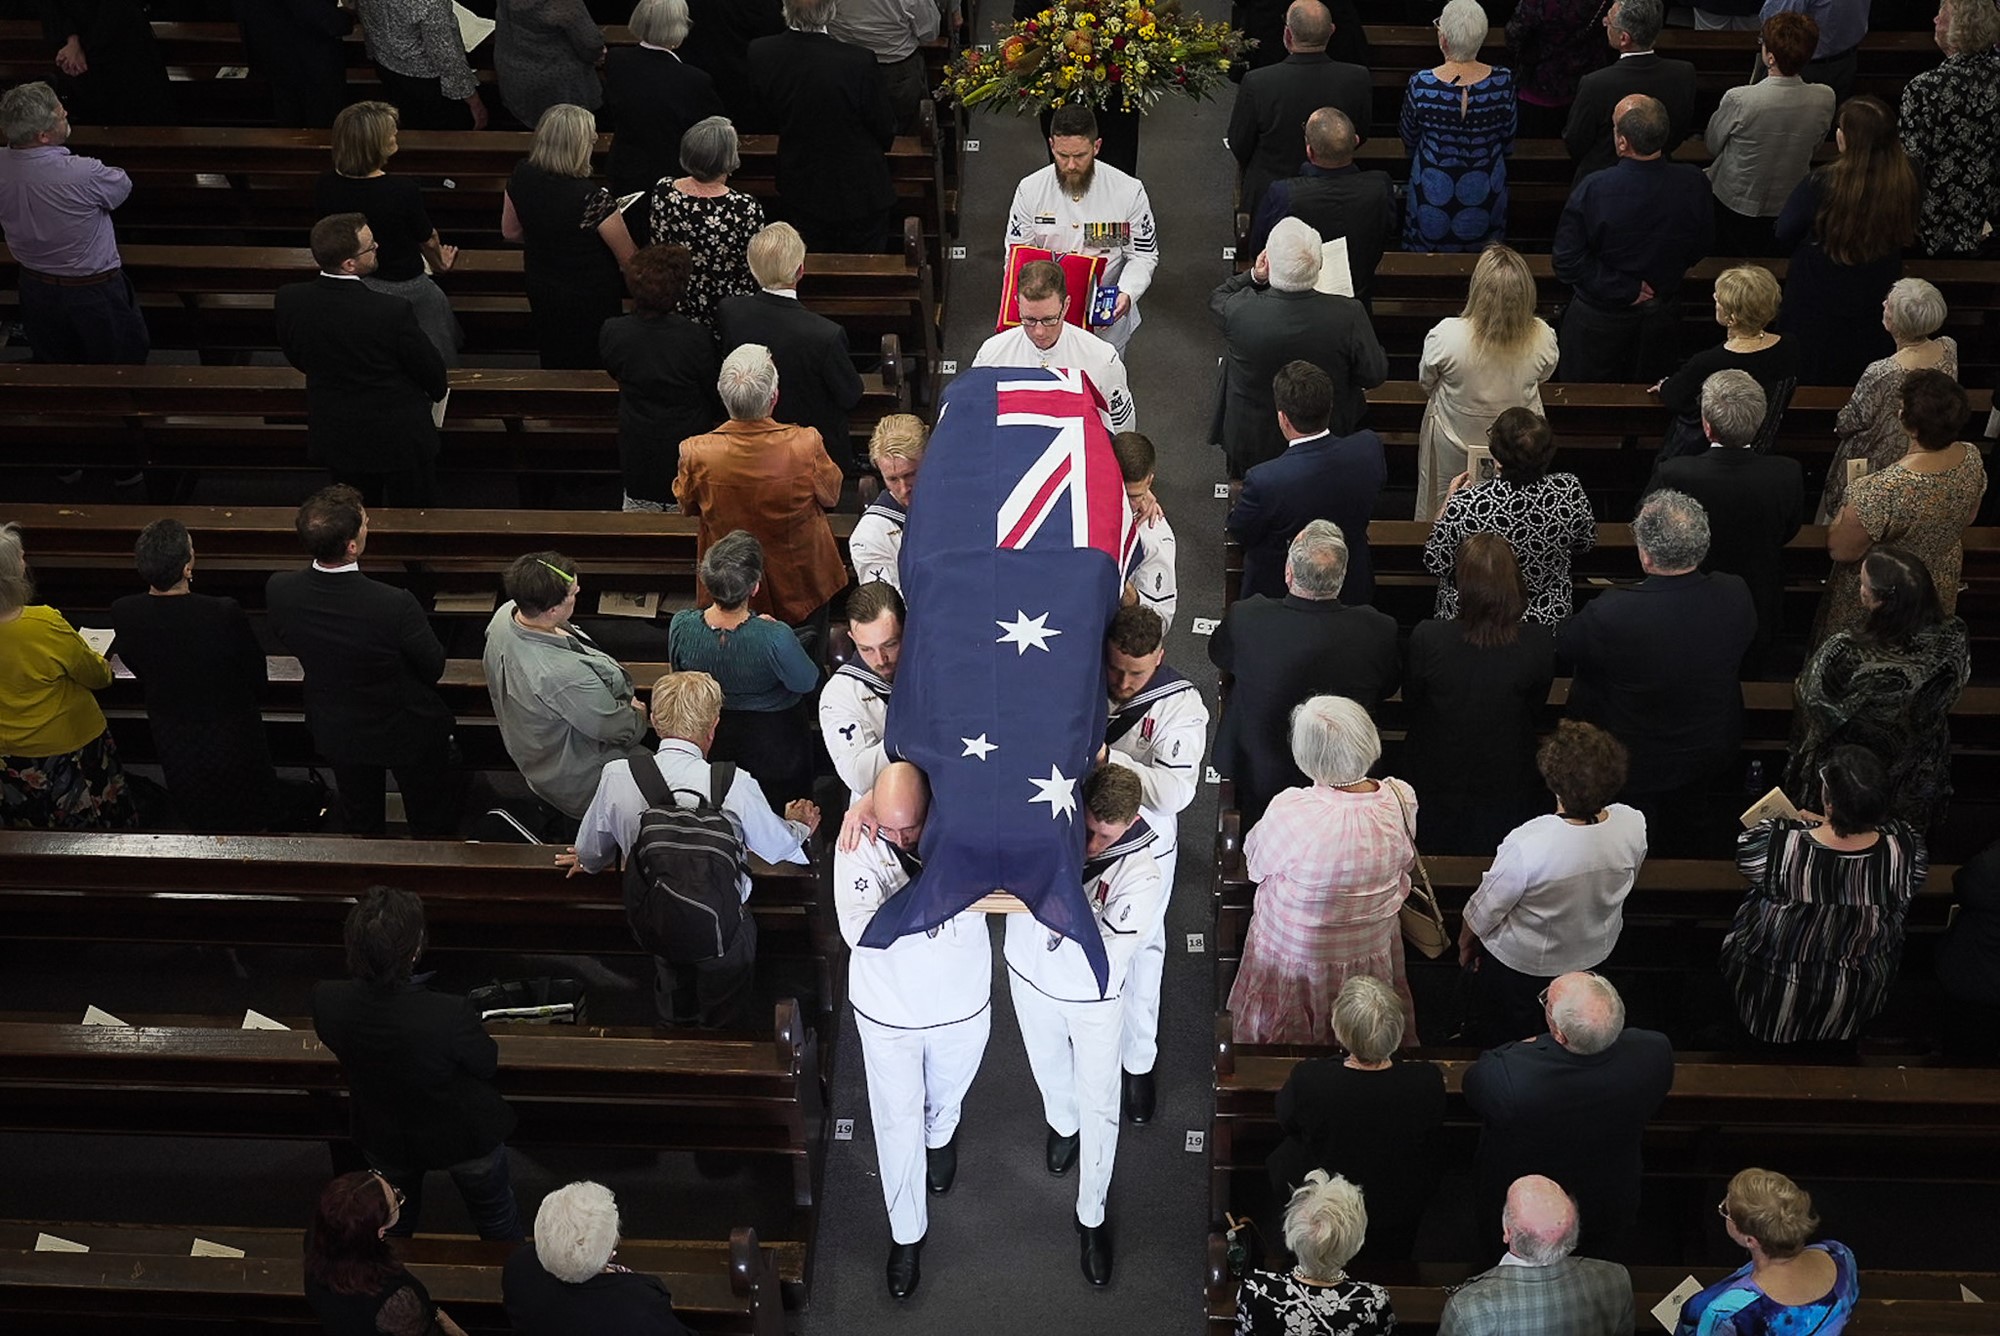 Bill Hayden's coffin leaves a church in Ipswich being carried by soldiers.